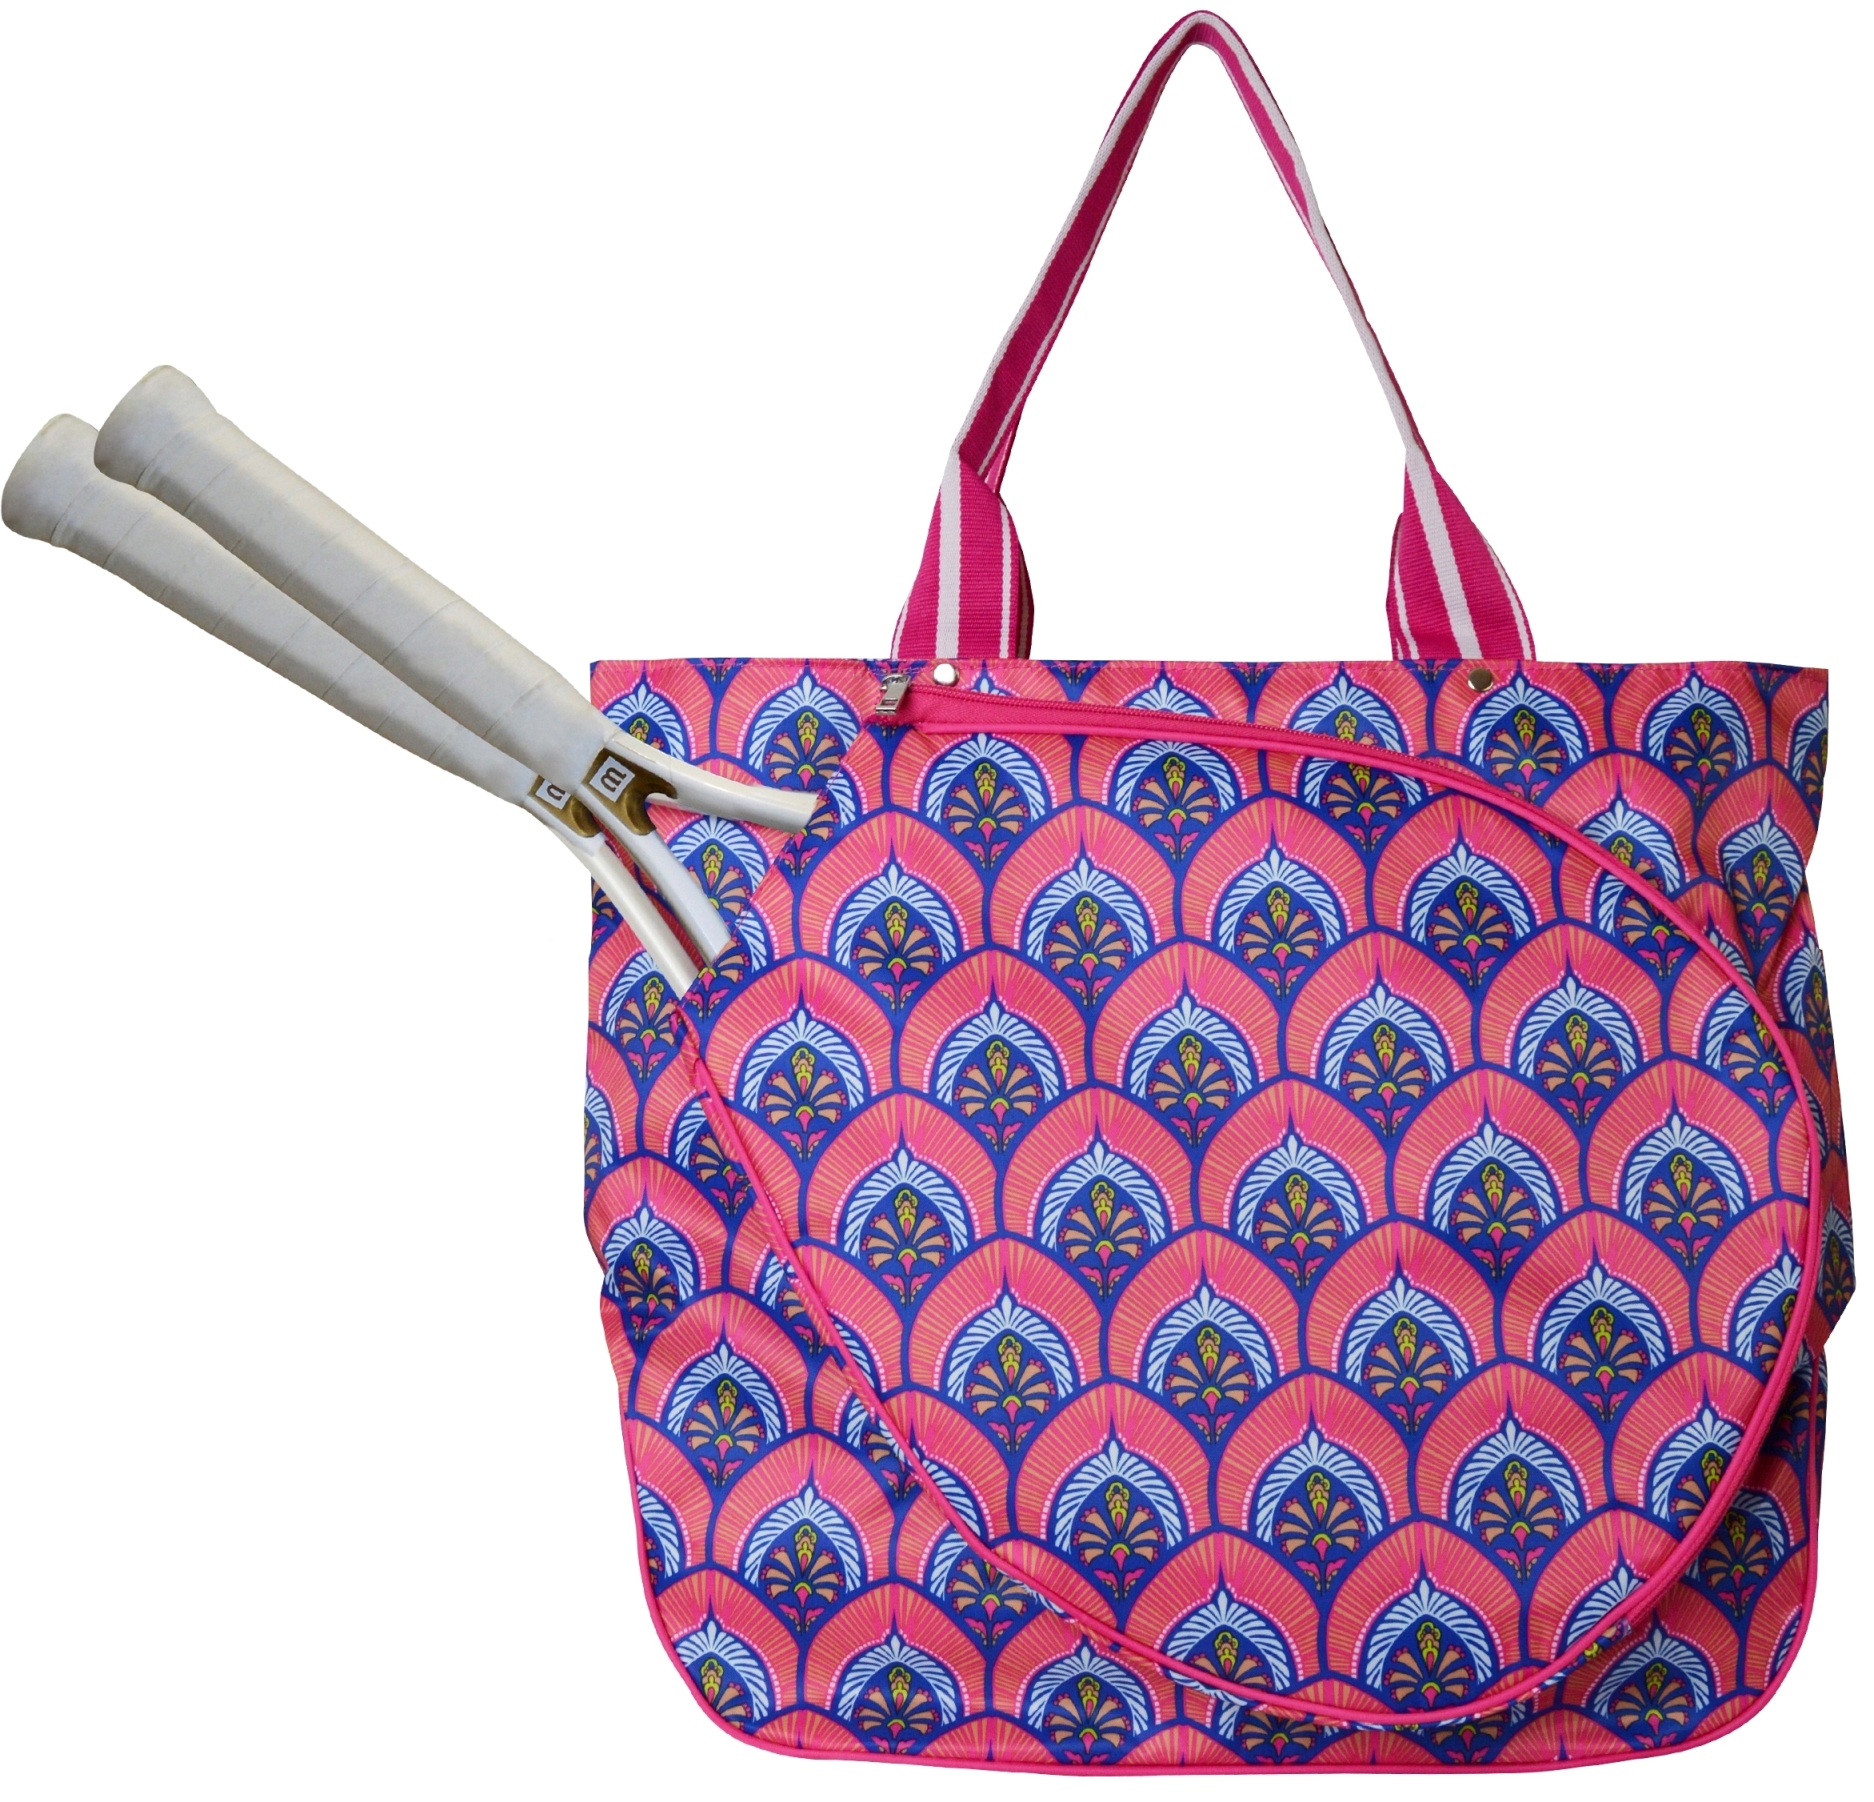 All For Color Bali Blooms Tennis Tote